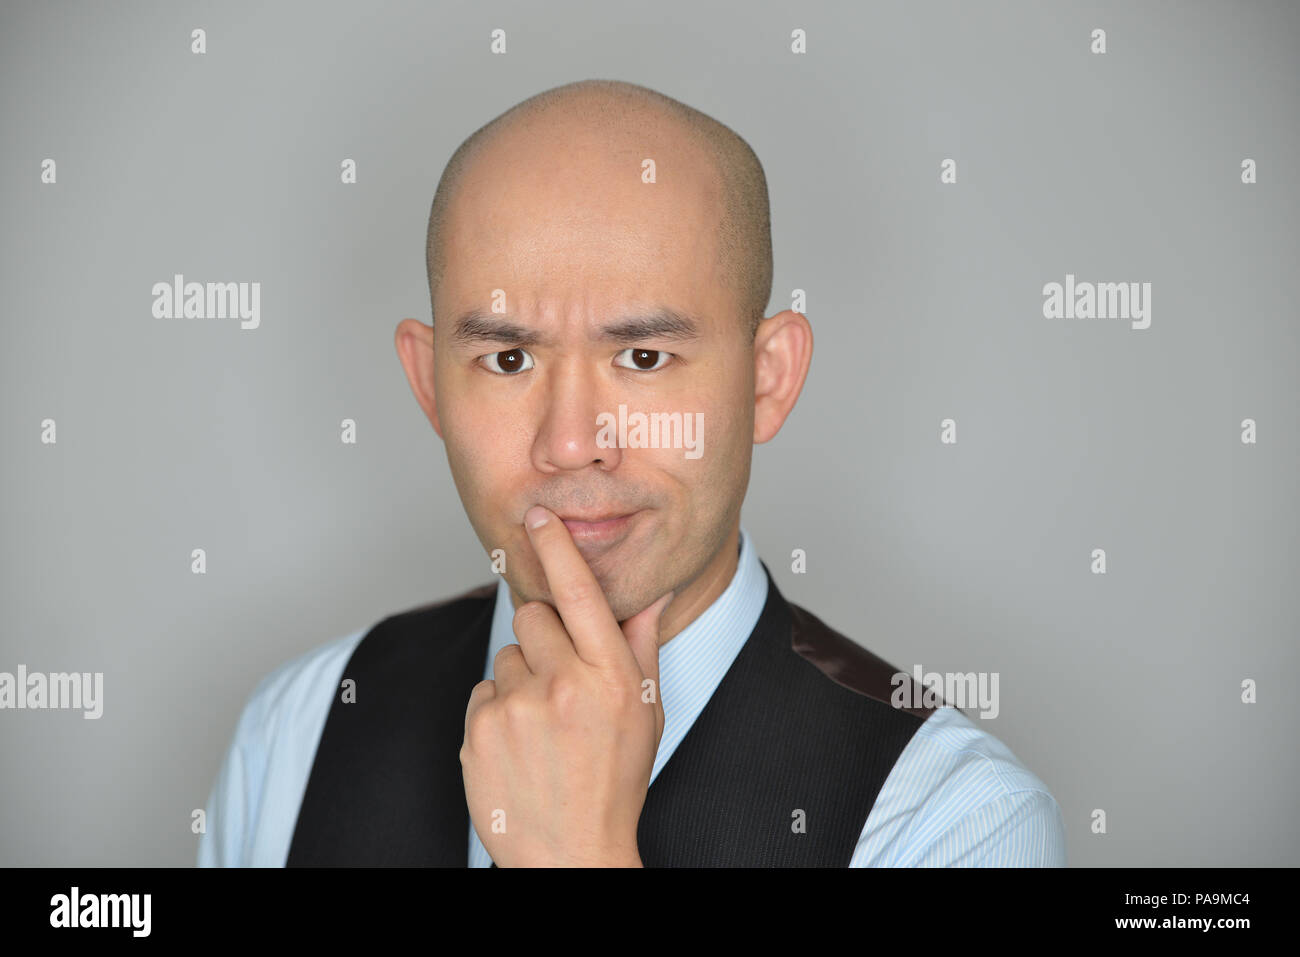 Businessman Confused and Perplexed Expression Isolated on Grey Stock Photo